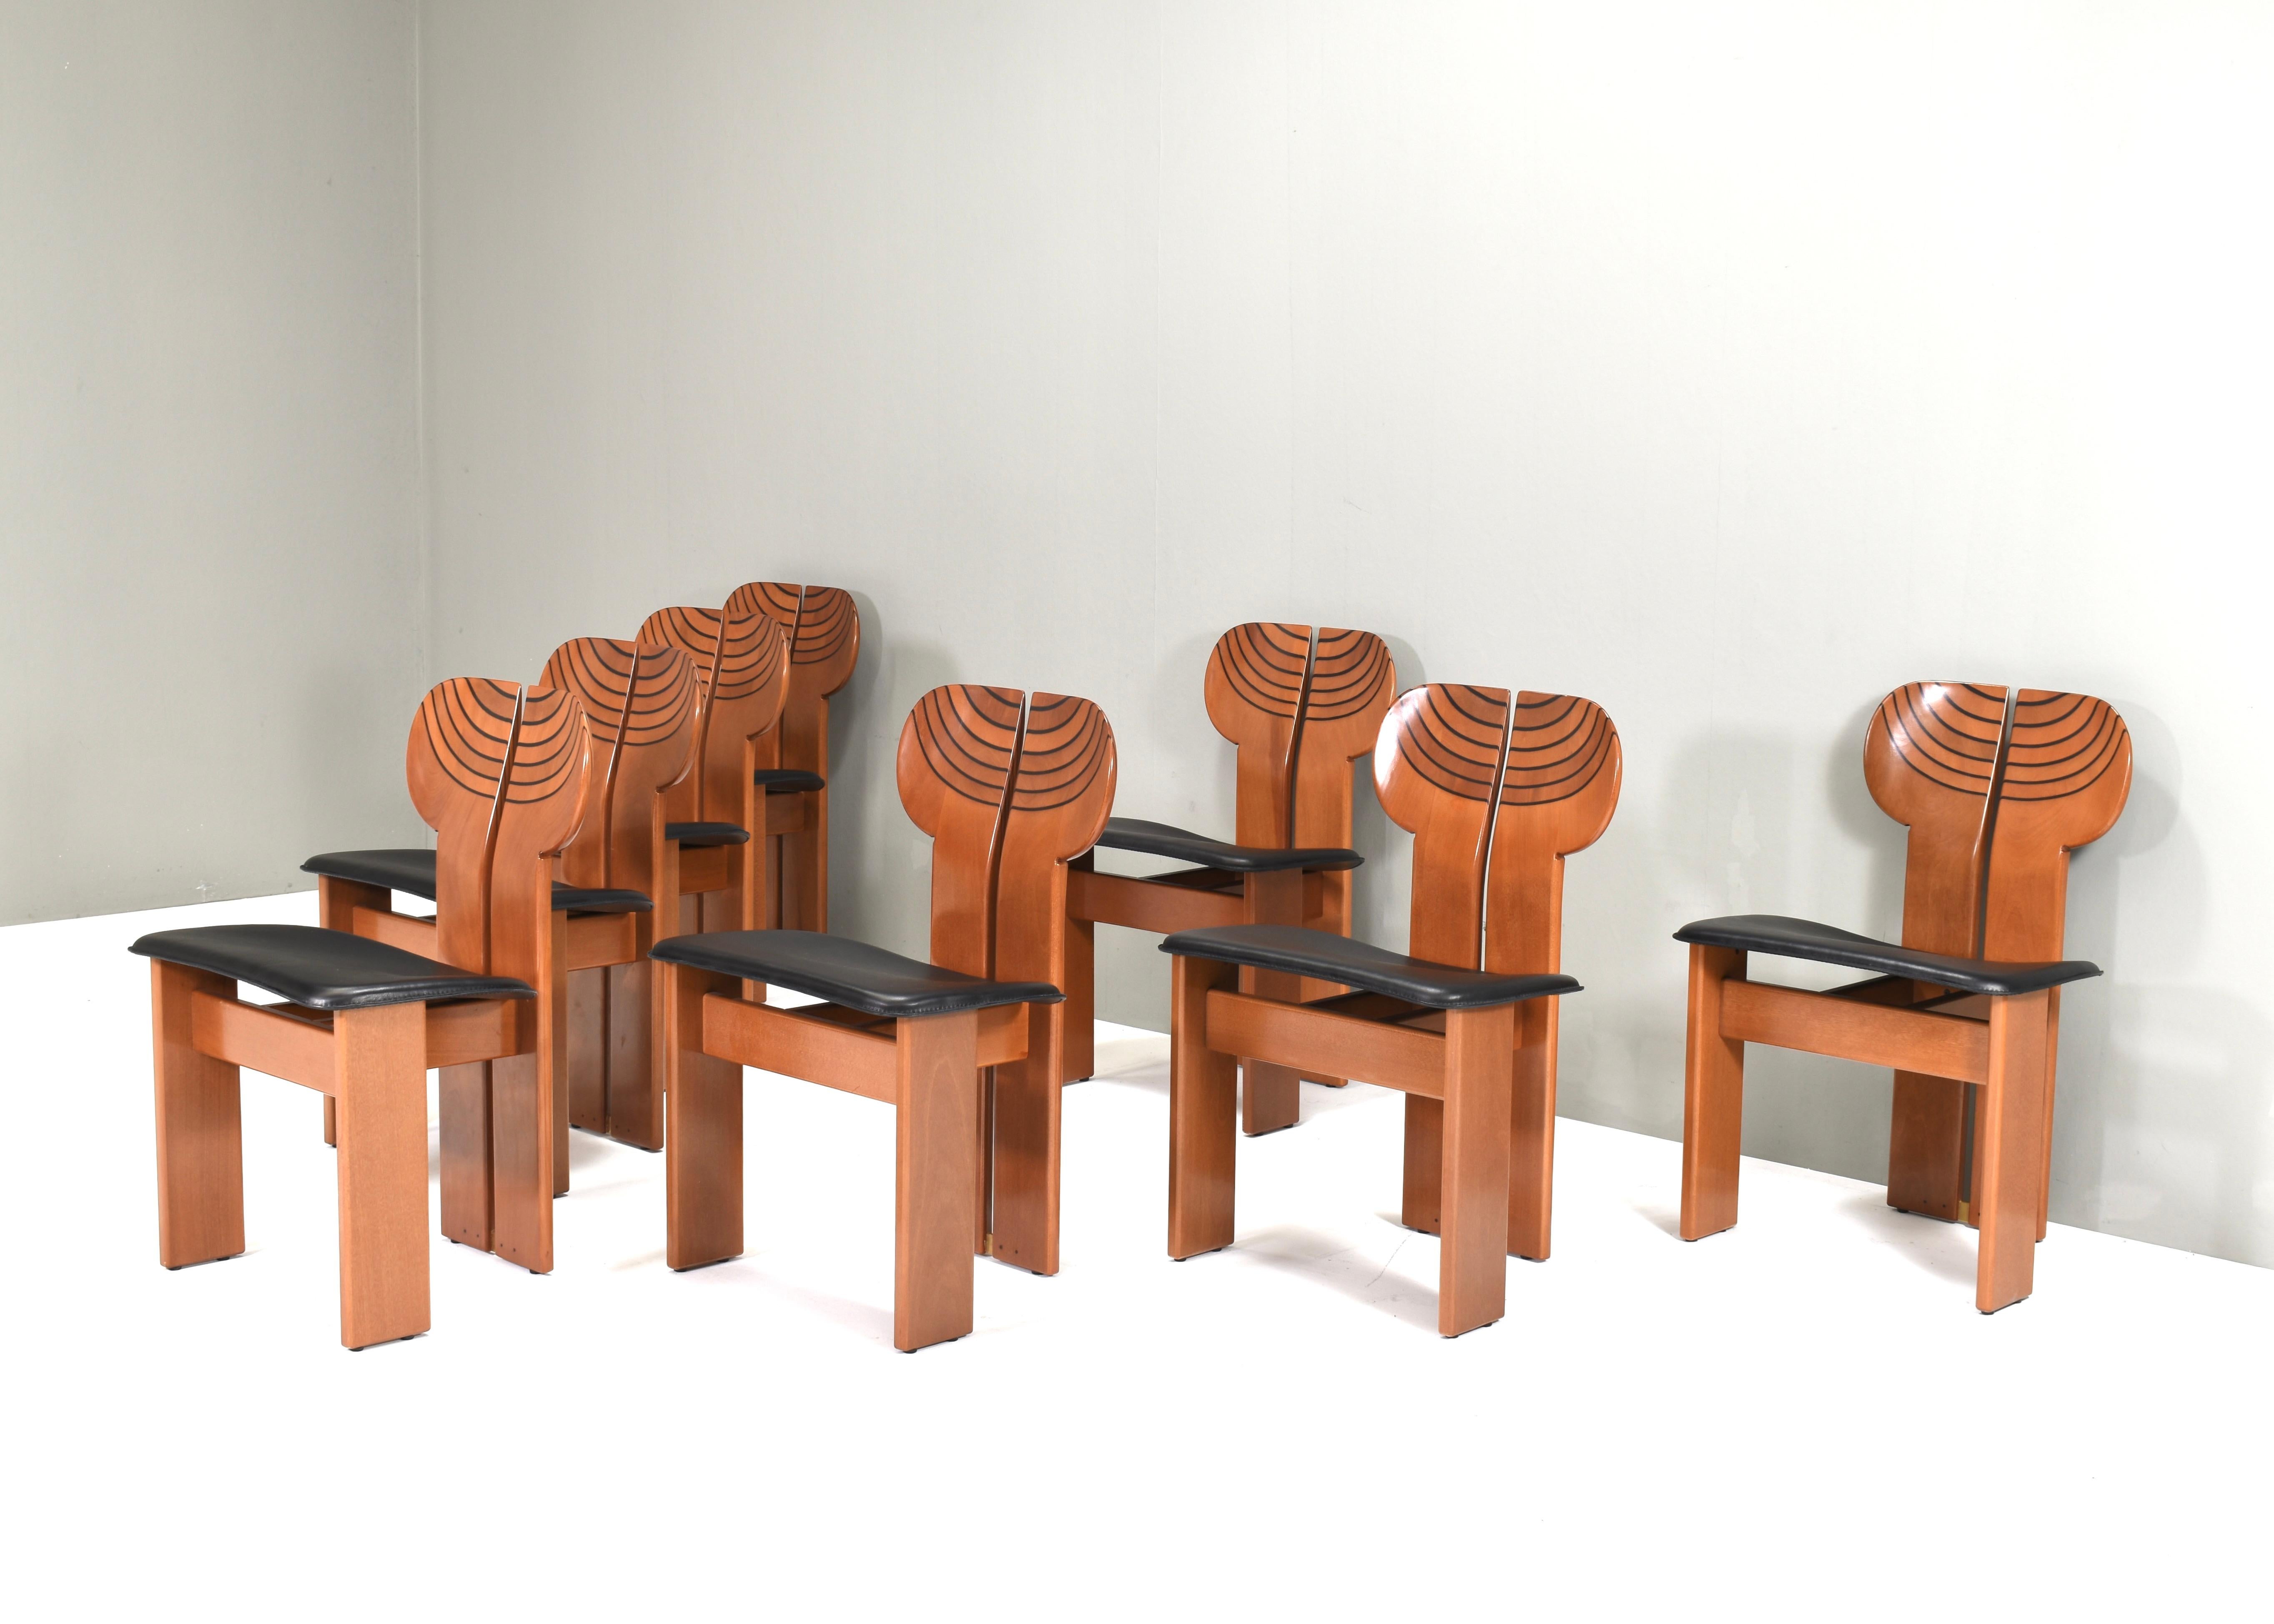 Italian Africa Chairs by Afra & Tobia Scarpa for Maxalto, Italy - 1975, set of 8  For Sale